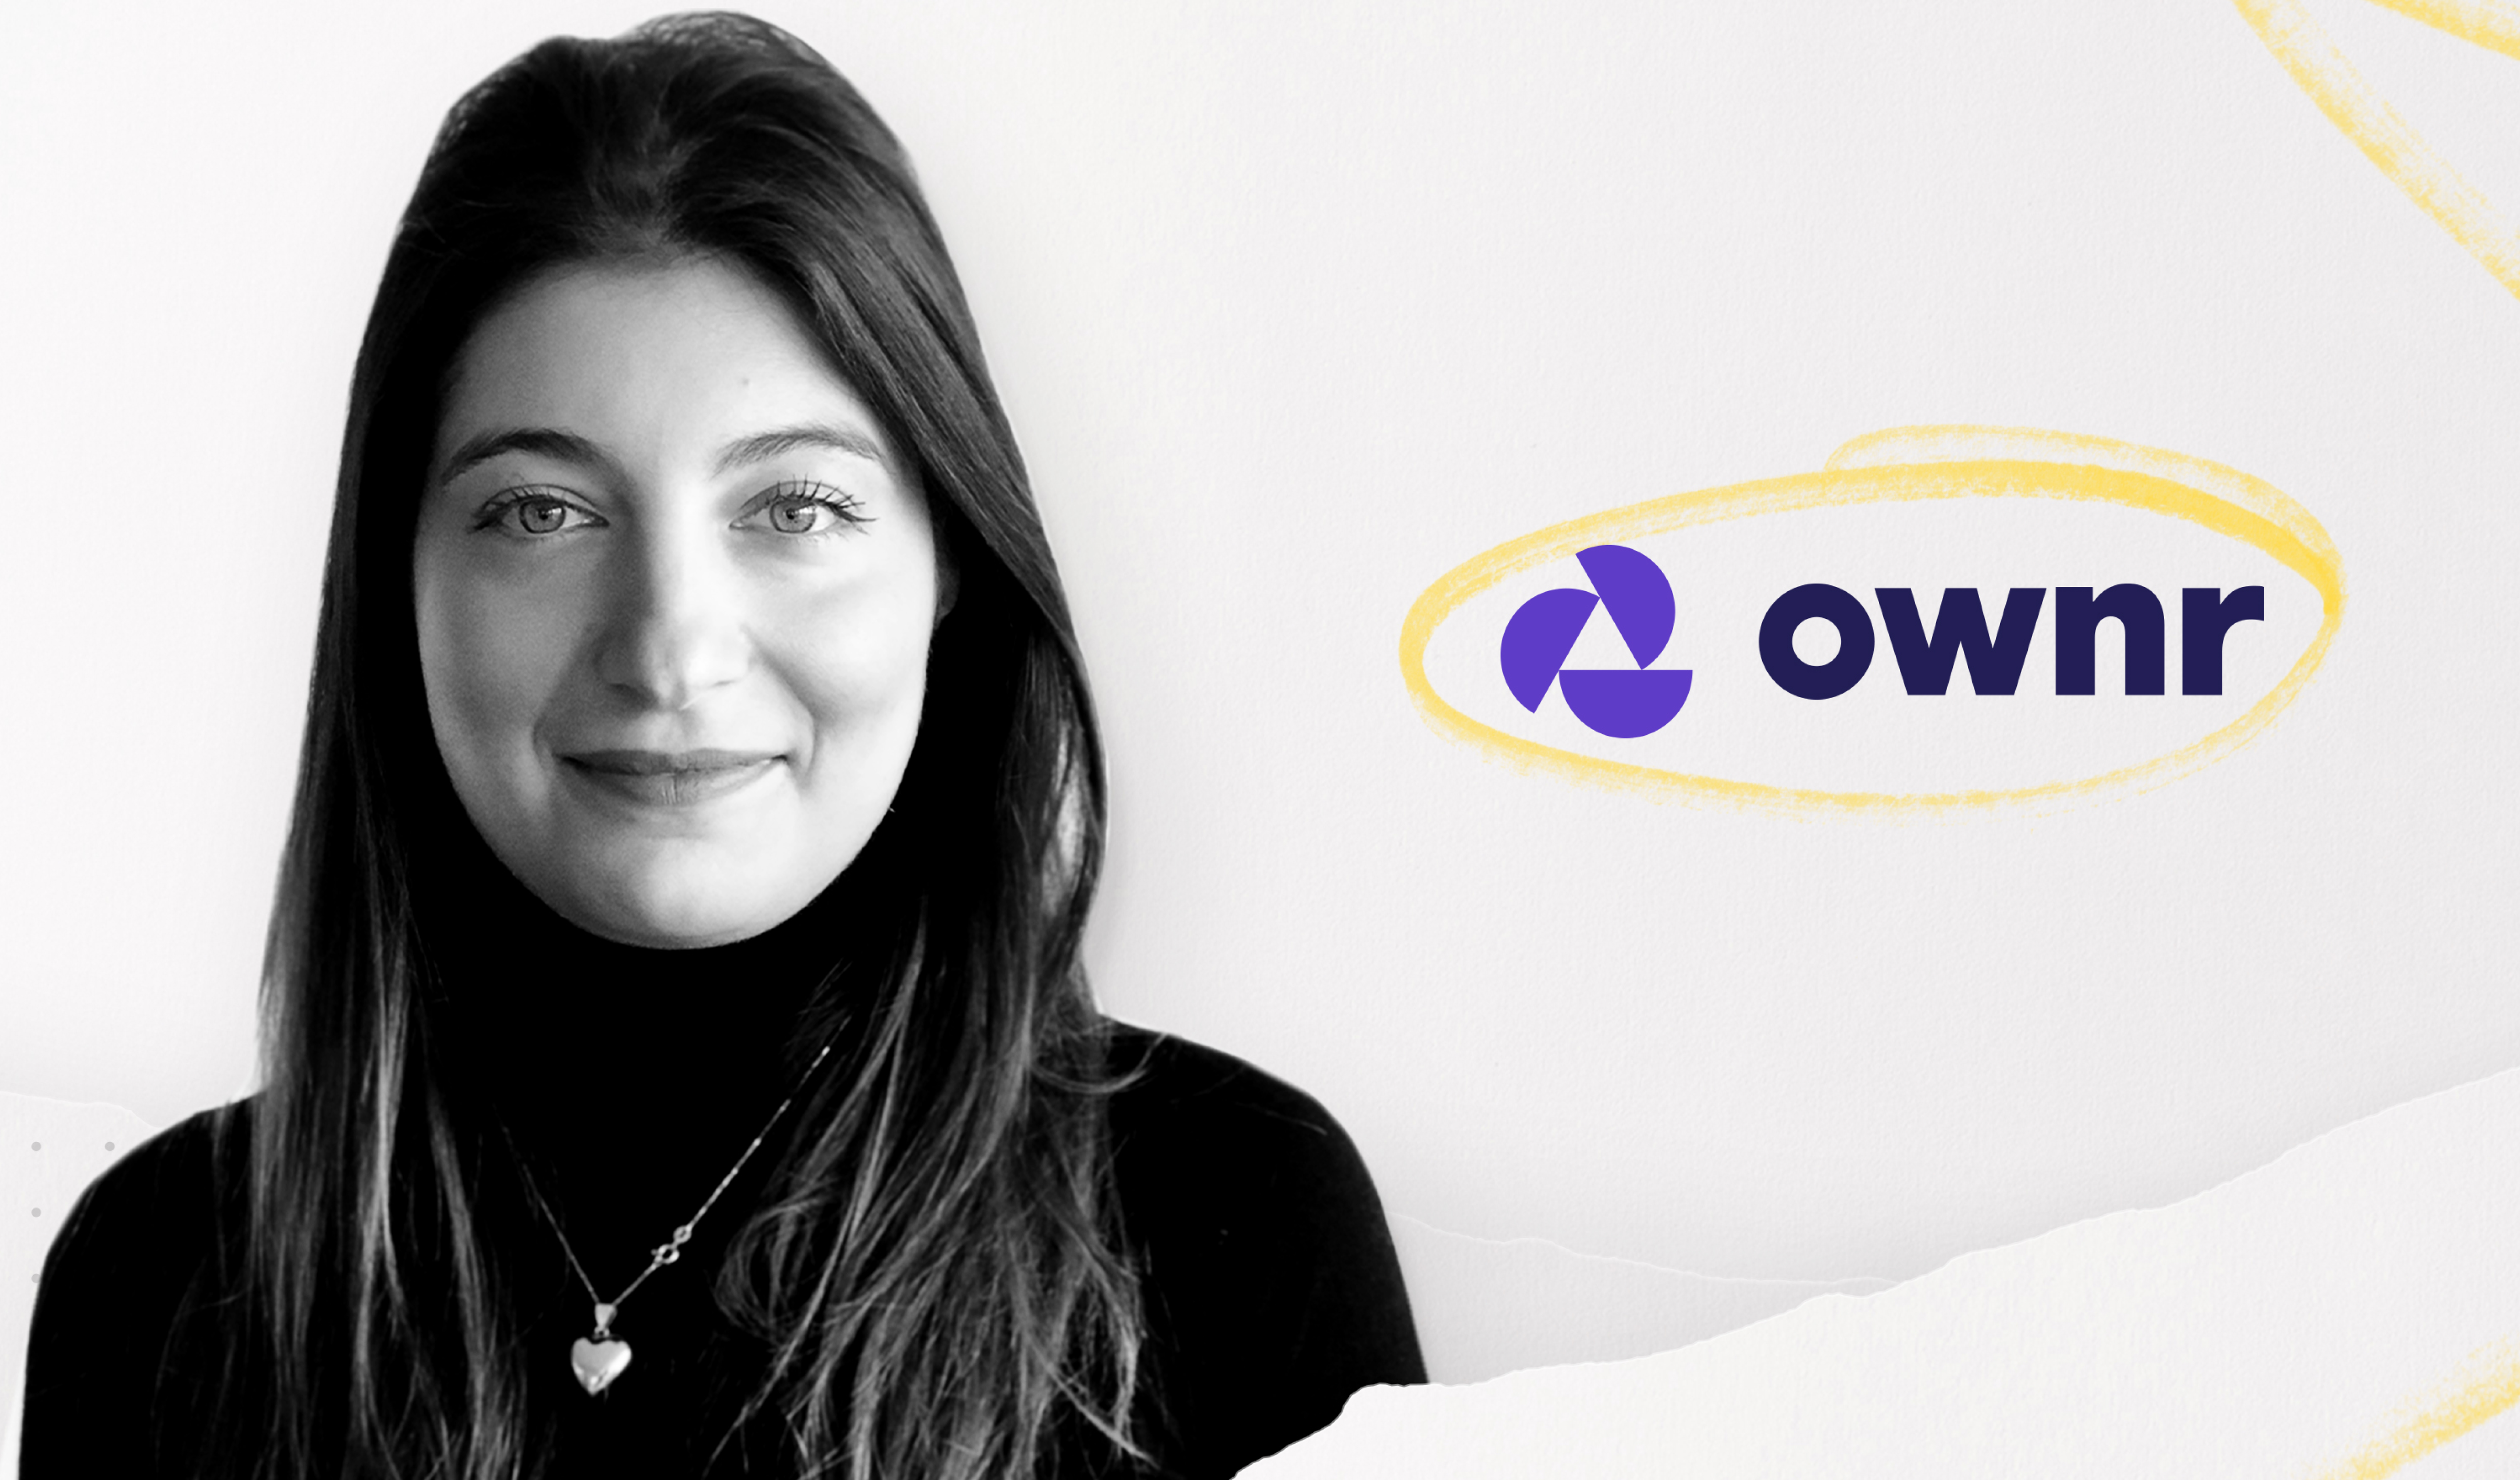 Making it easier for entrepreneurs and small business owners: a conversation with Shadi McIsaac, CEO and co-founder of Ownr